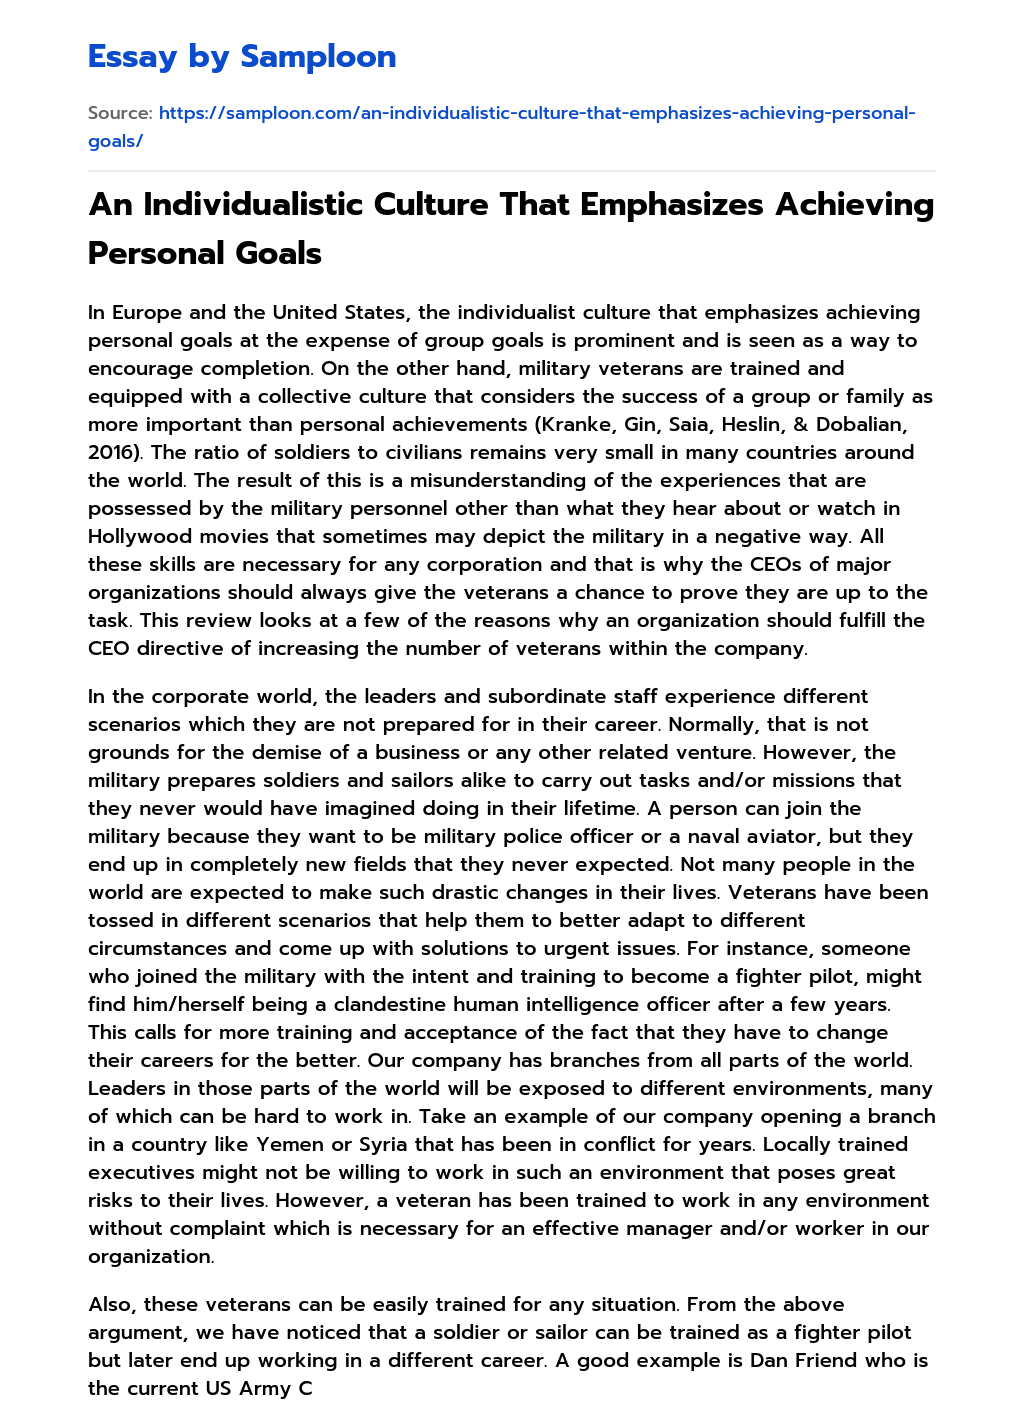 An Individualistic Culture That Emphasizes Achieving Personal Goals essay